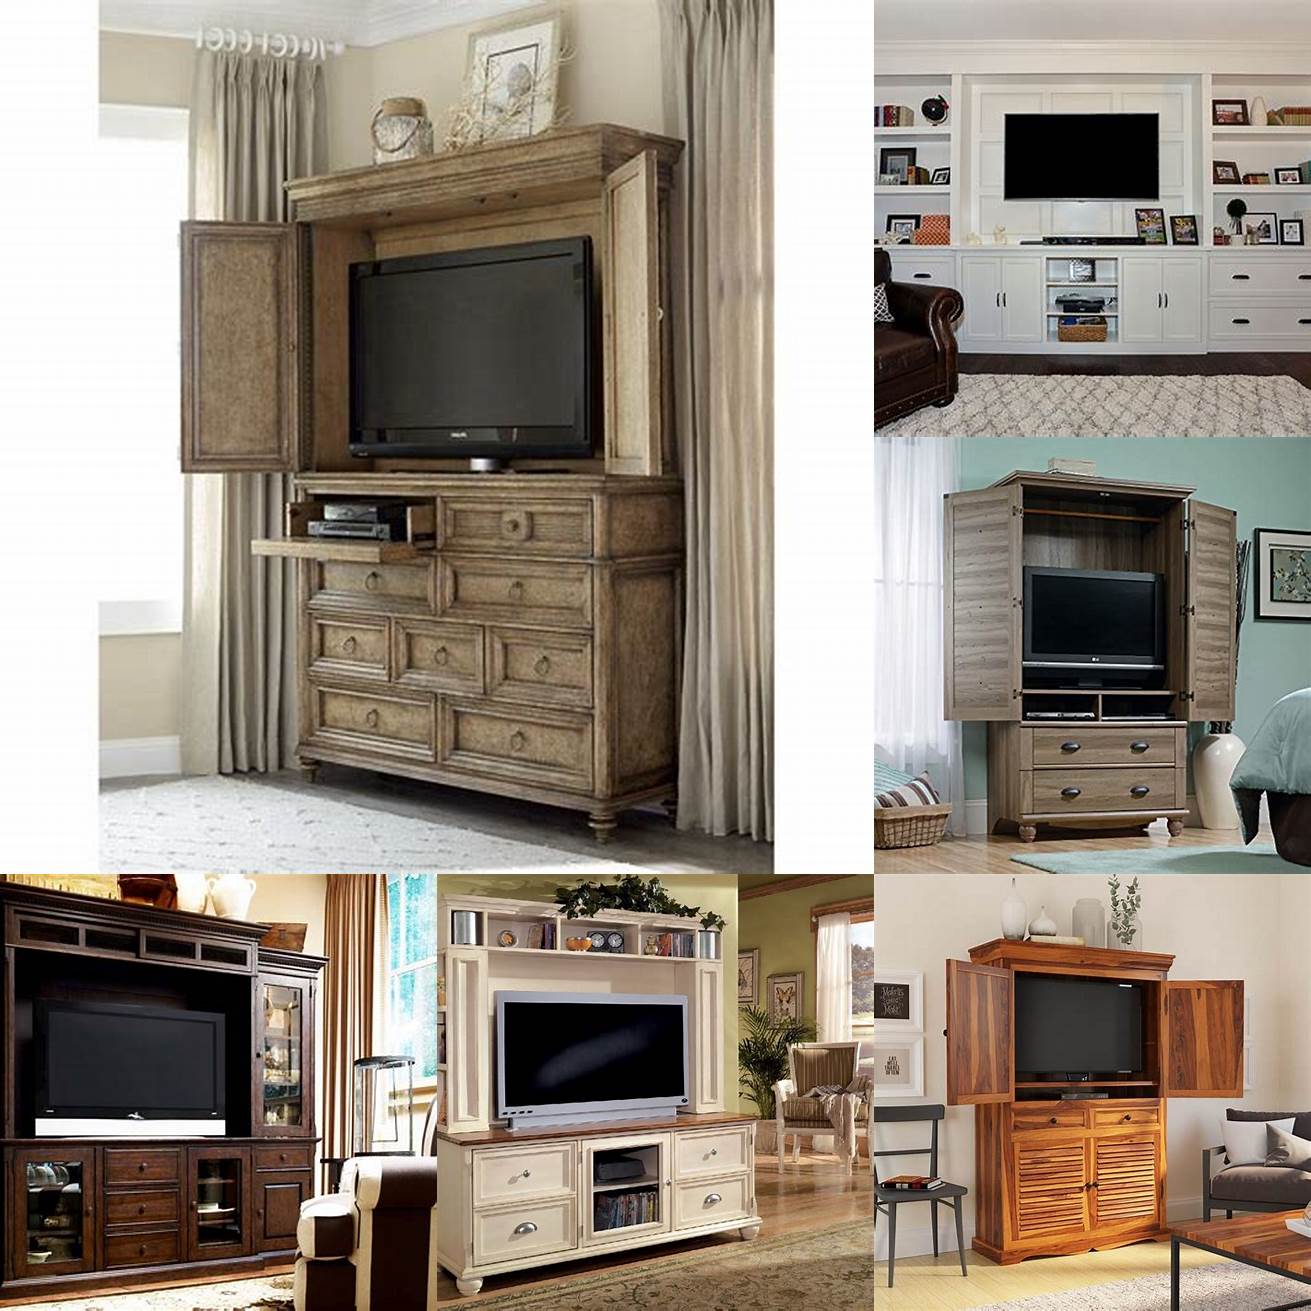 TV Armoires These are designed specifically for storing a TV and other entertainment equipment